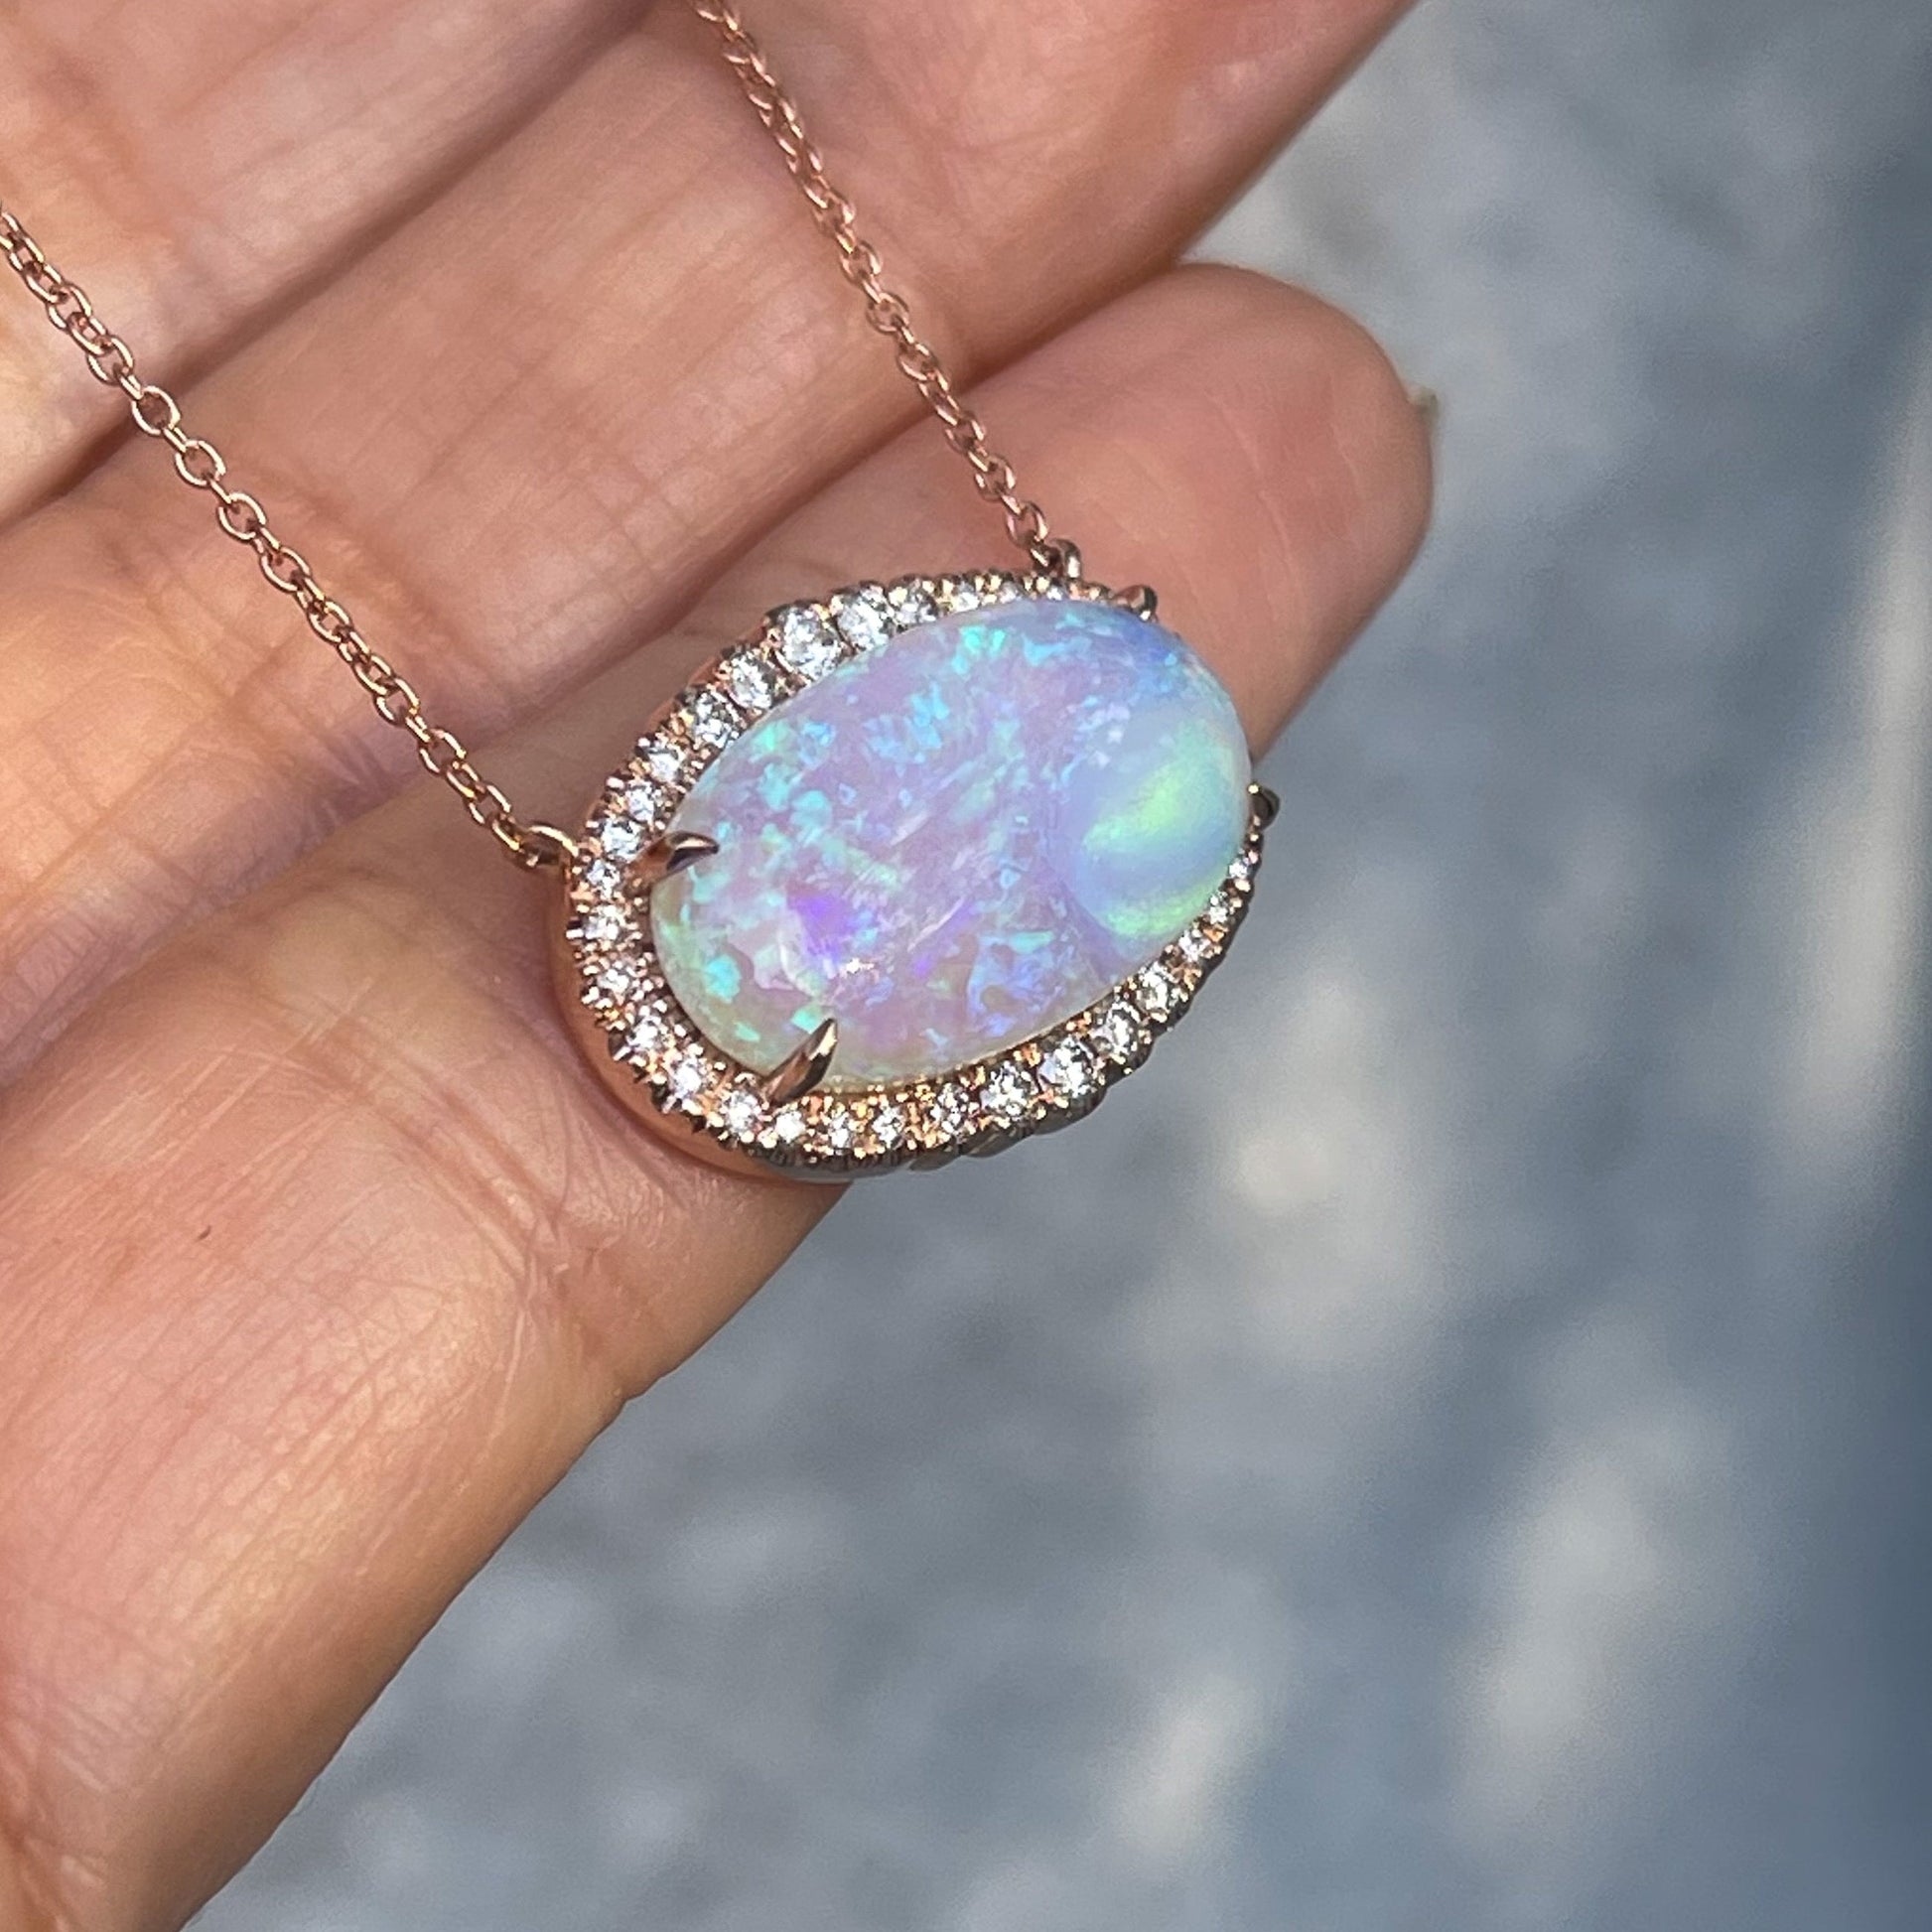 An  Australian Opal Necklace by NIXIN Jewelry shot in shade against a hand. The Crystal Opal shows purple and green with a pave diamond halo.